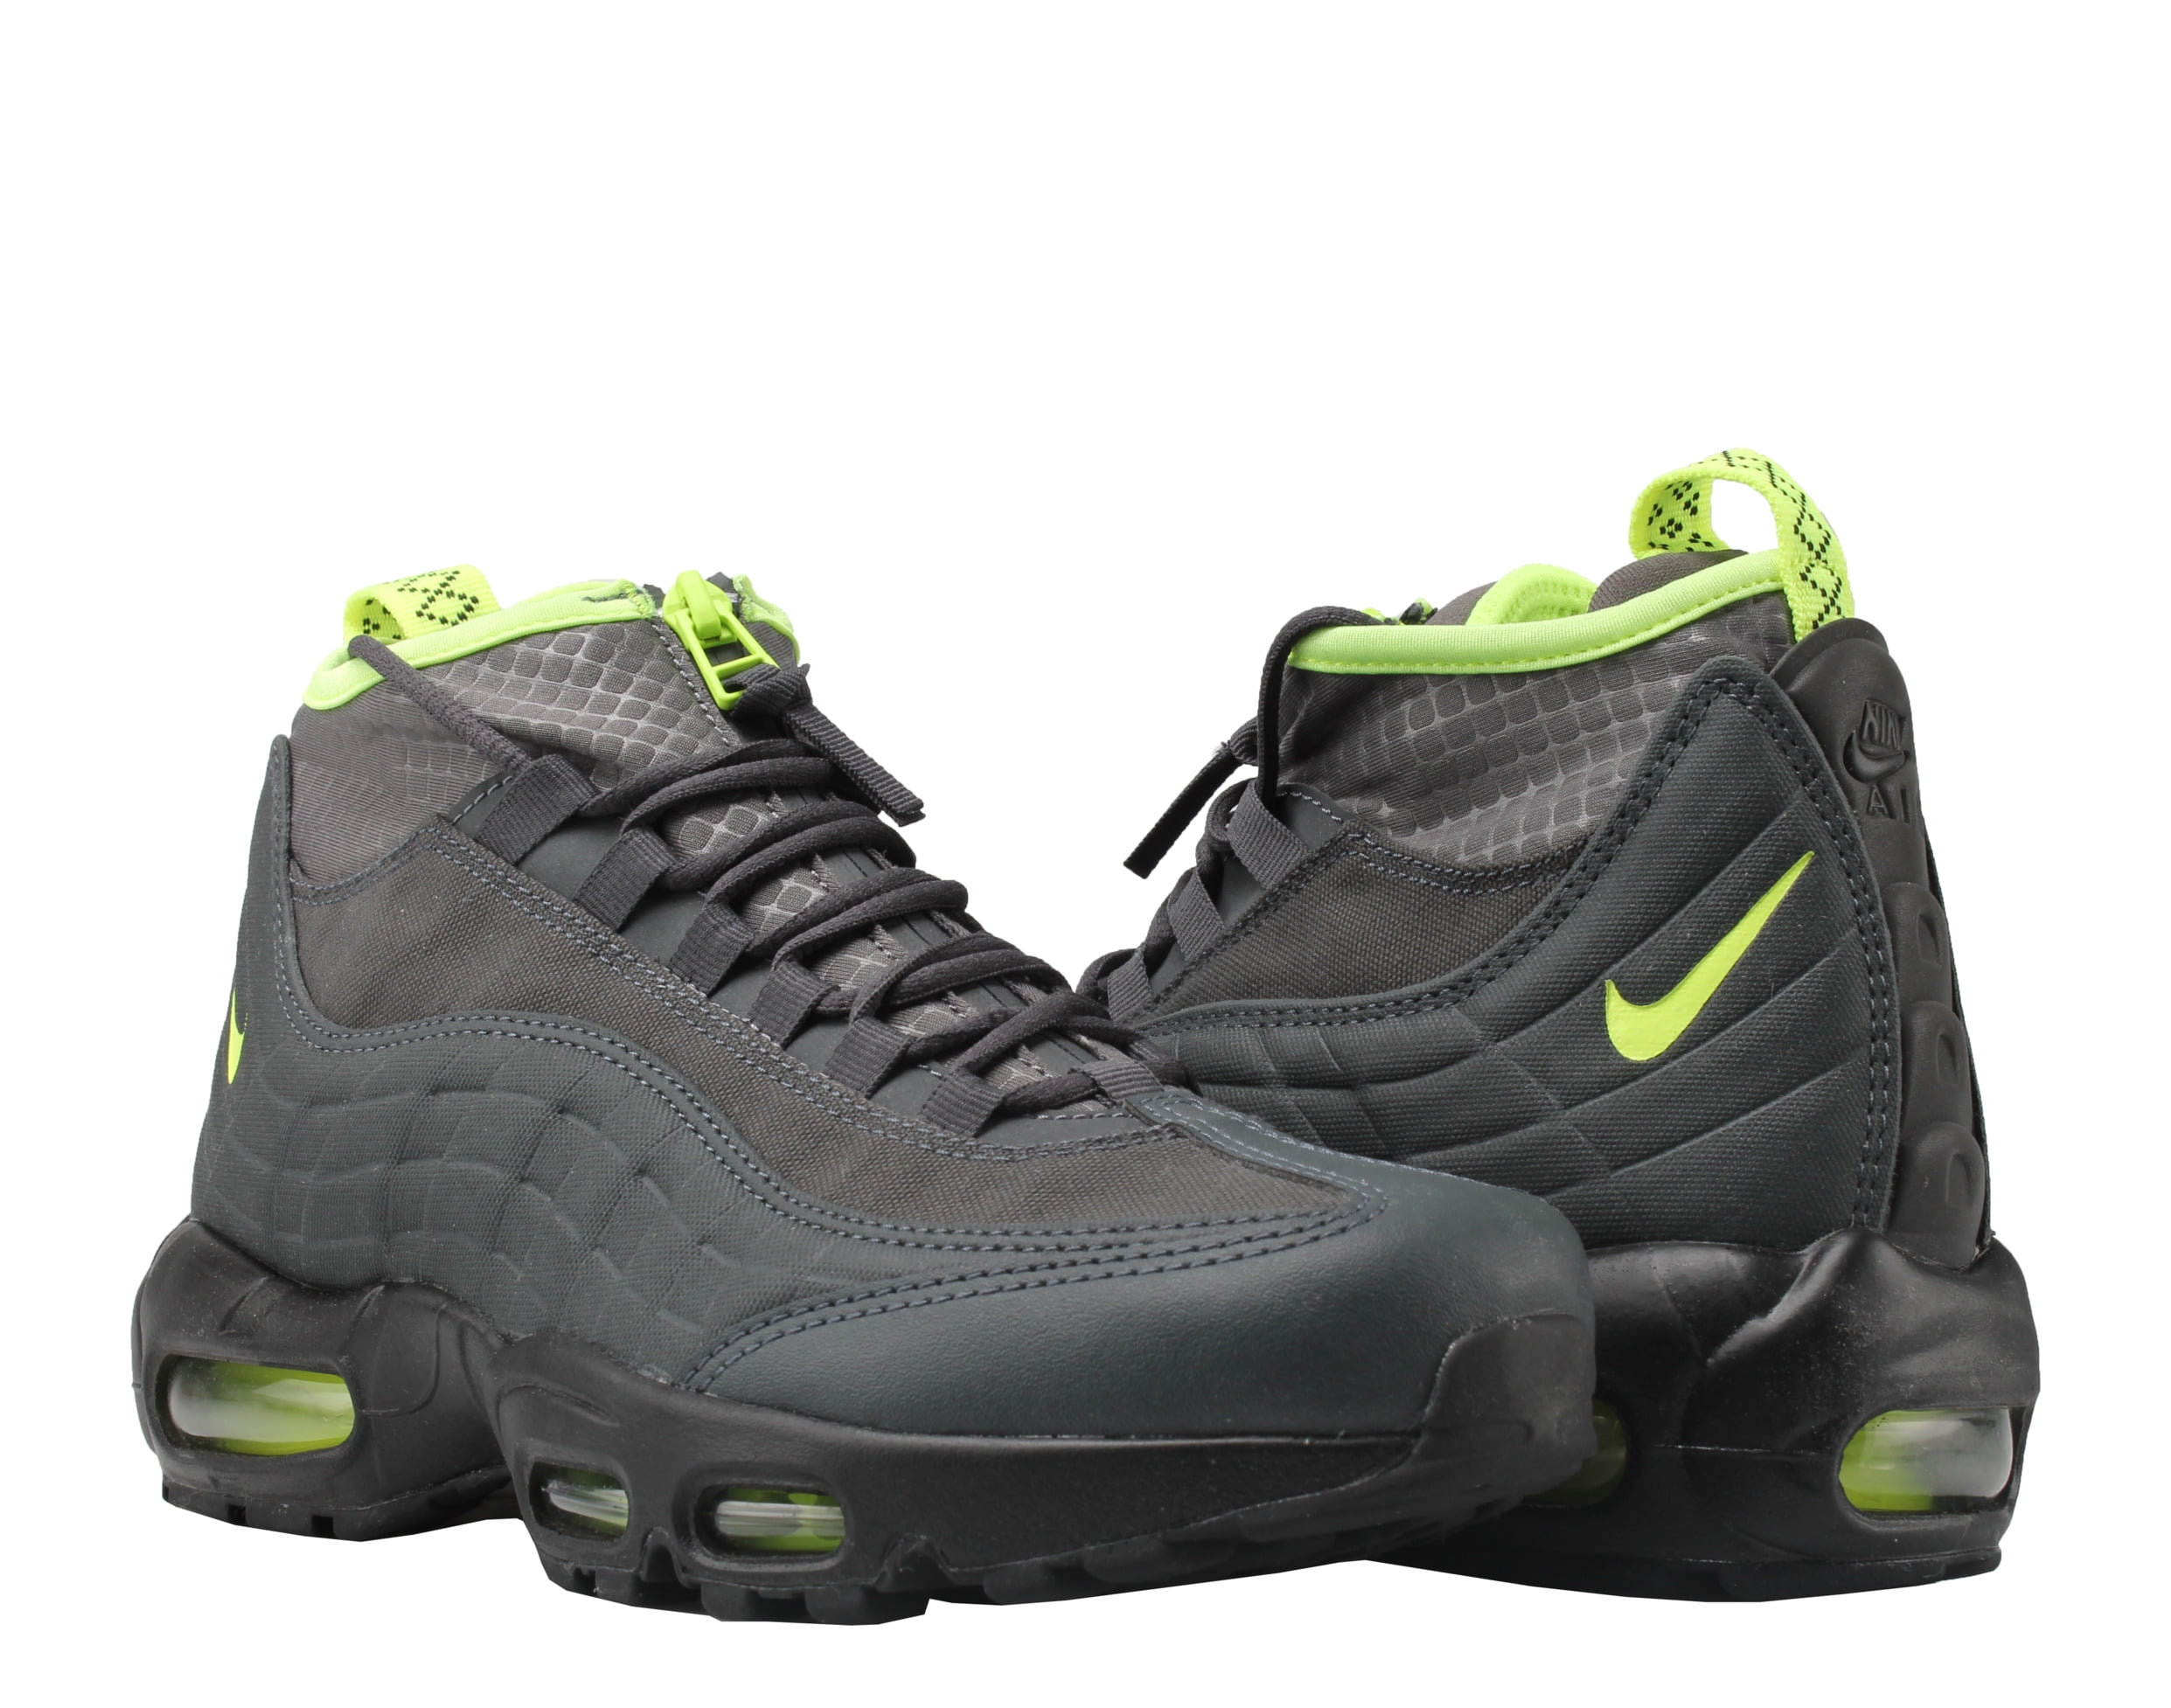 Nike Air Max 95 Sneakerboot Mens Shoes Size 12